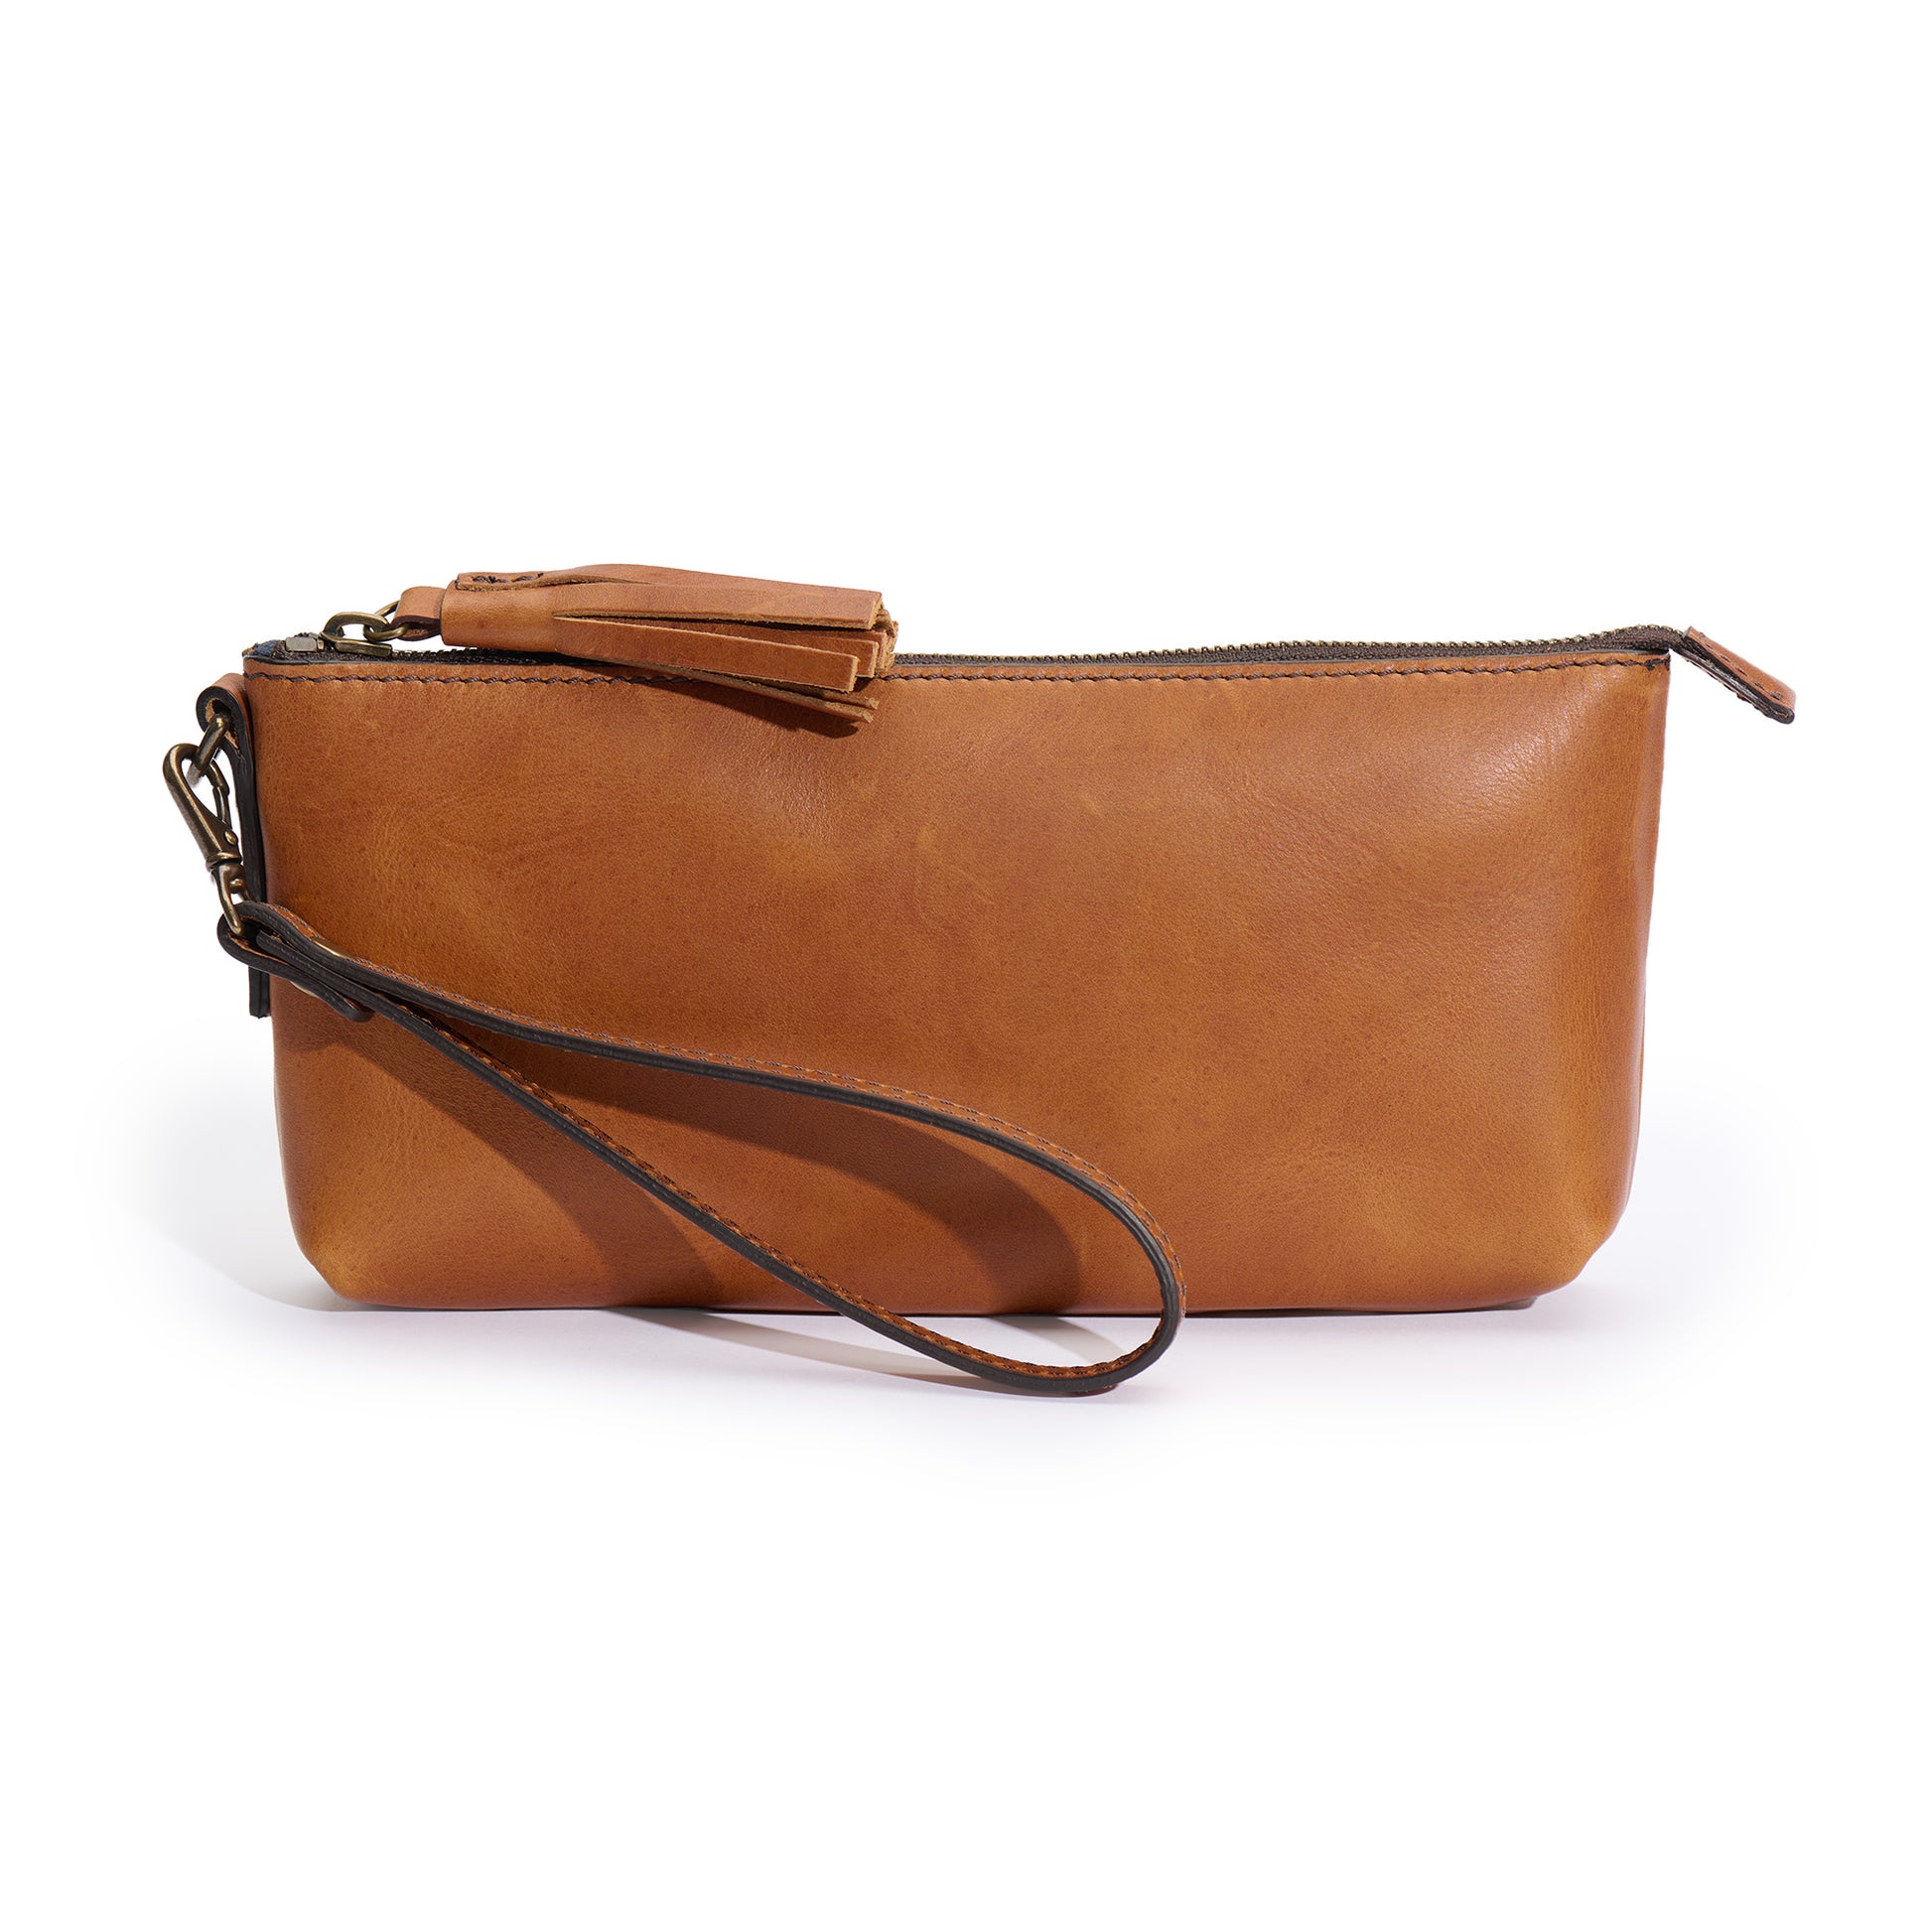 broadway wristlet made of full grain leather by Jackson Wayne in Saddle Tan color leather